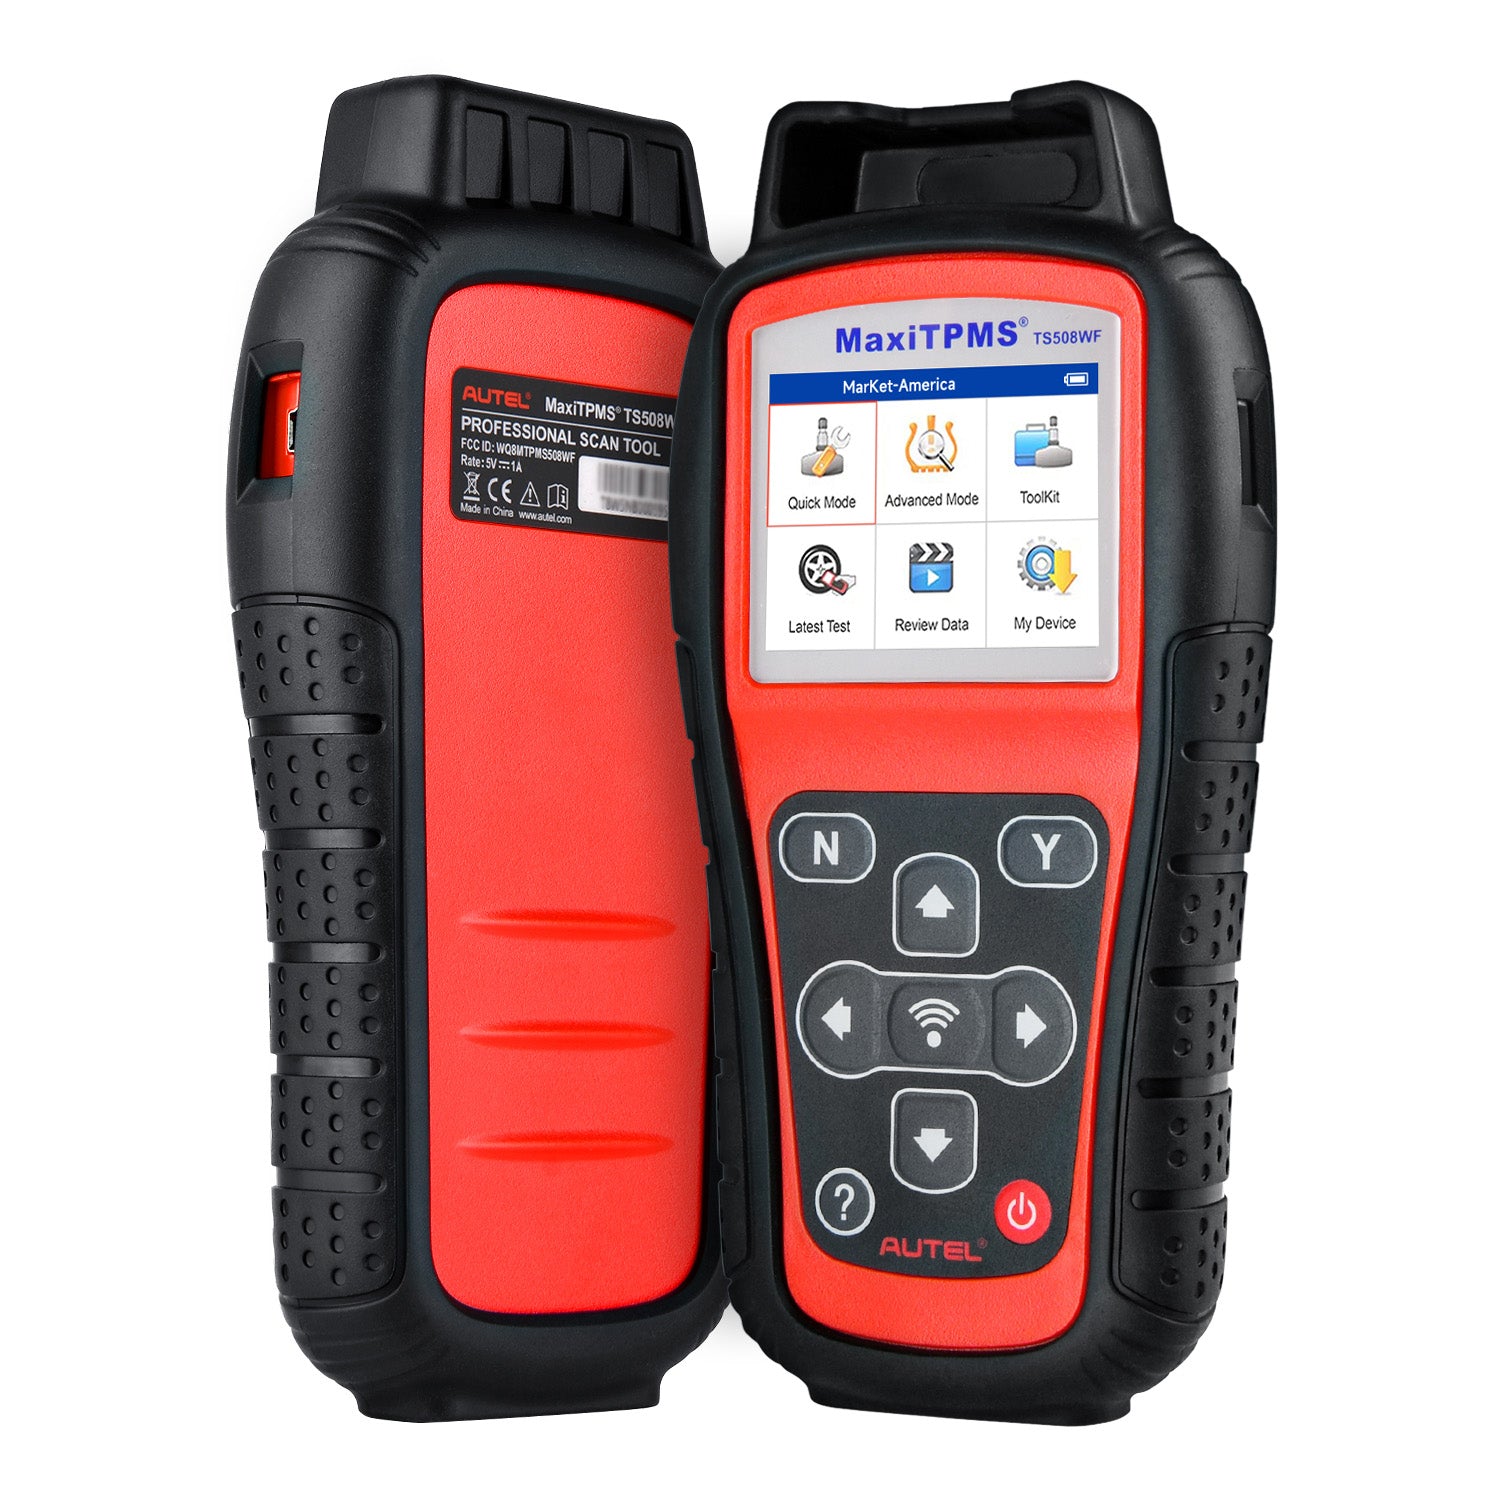 Autel MaxiTPMS TS508 WF TPMS Diagnostic Service Tool Support Tire Sensor Reset, Activate, Program and Relearn, Upgrade Version of TS508, Support Wifi Update